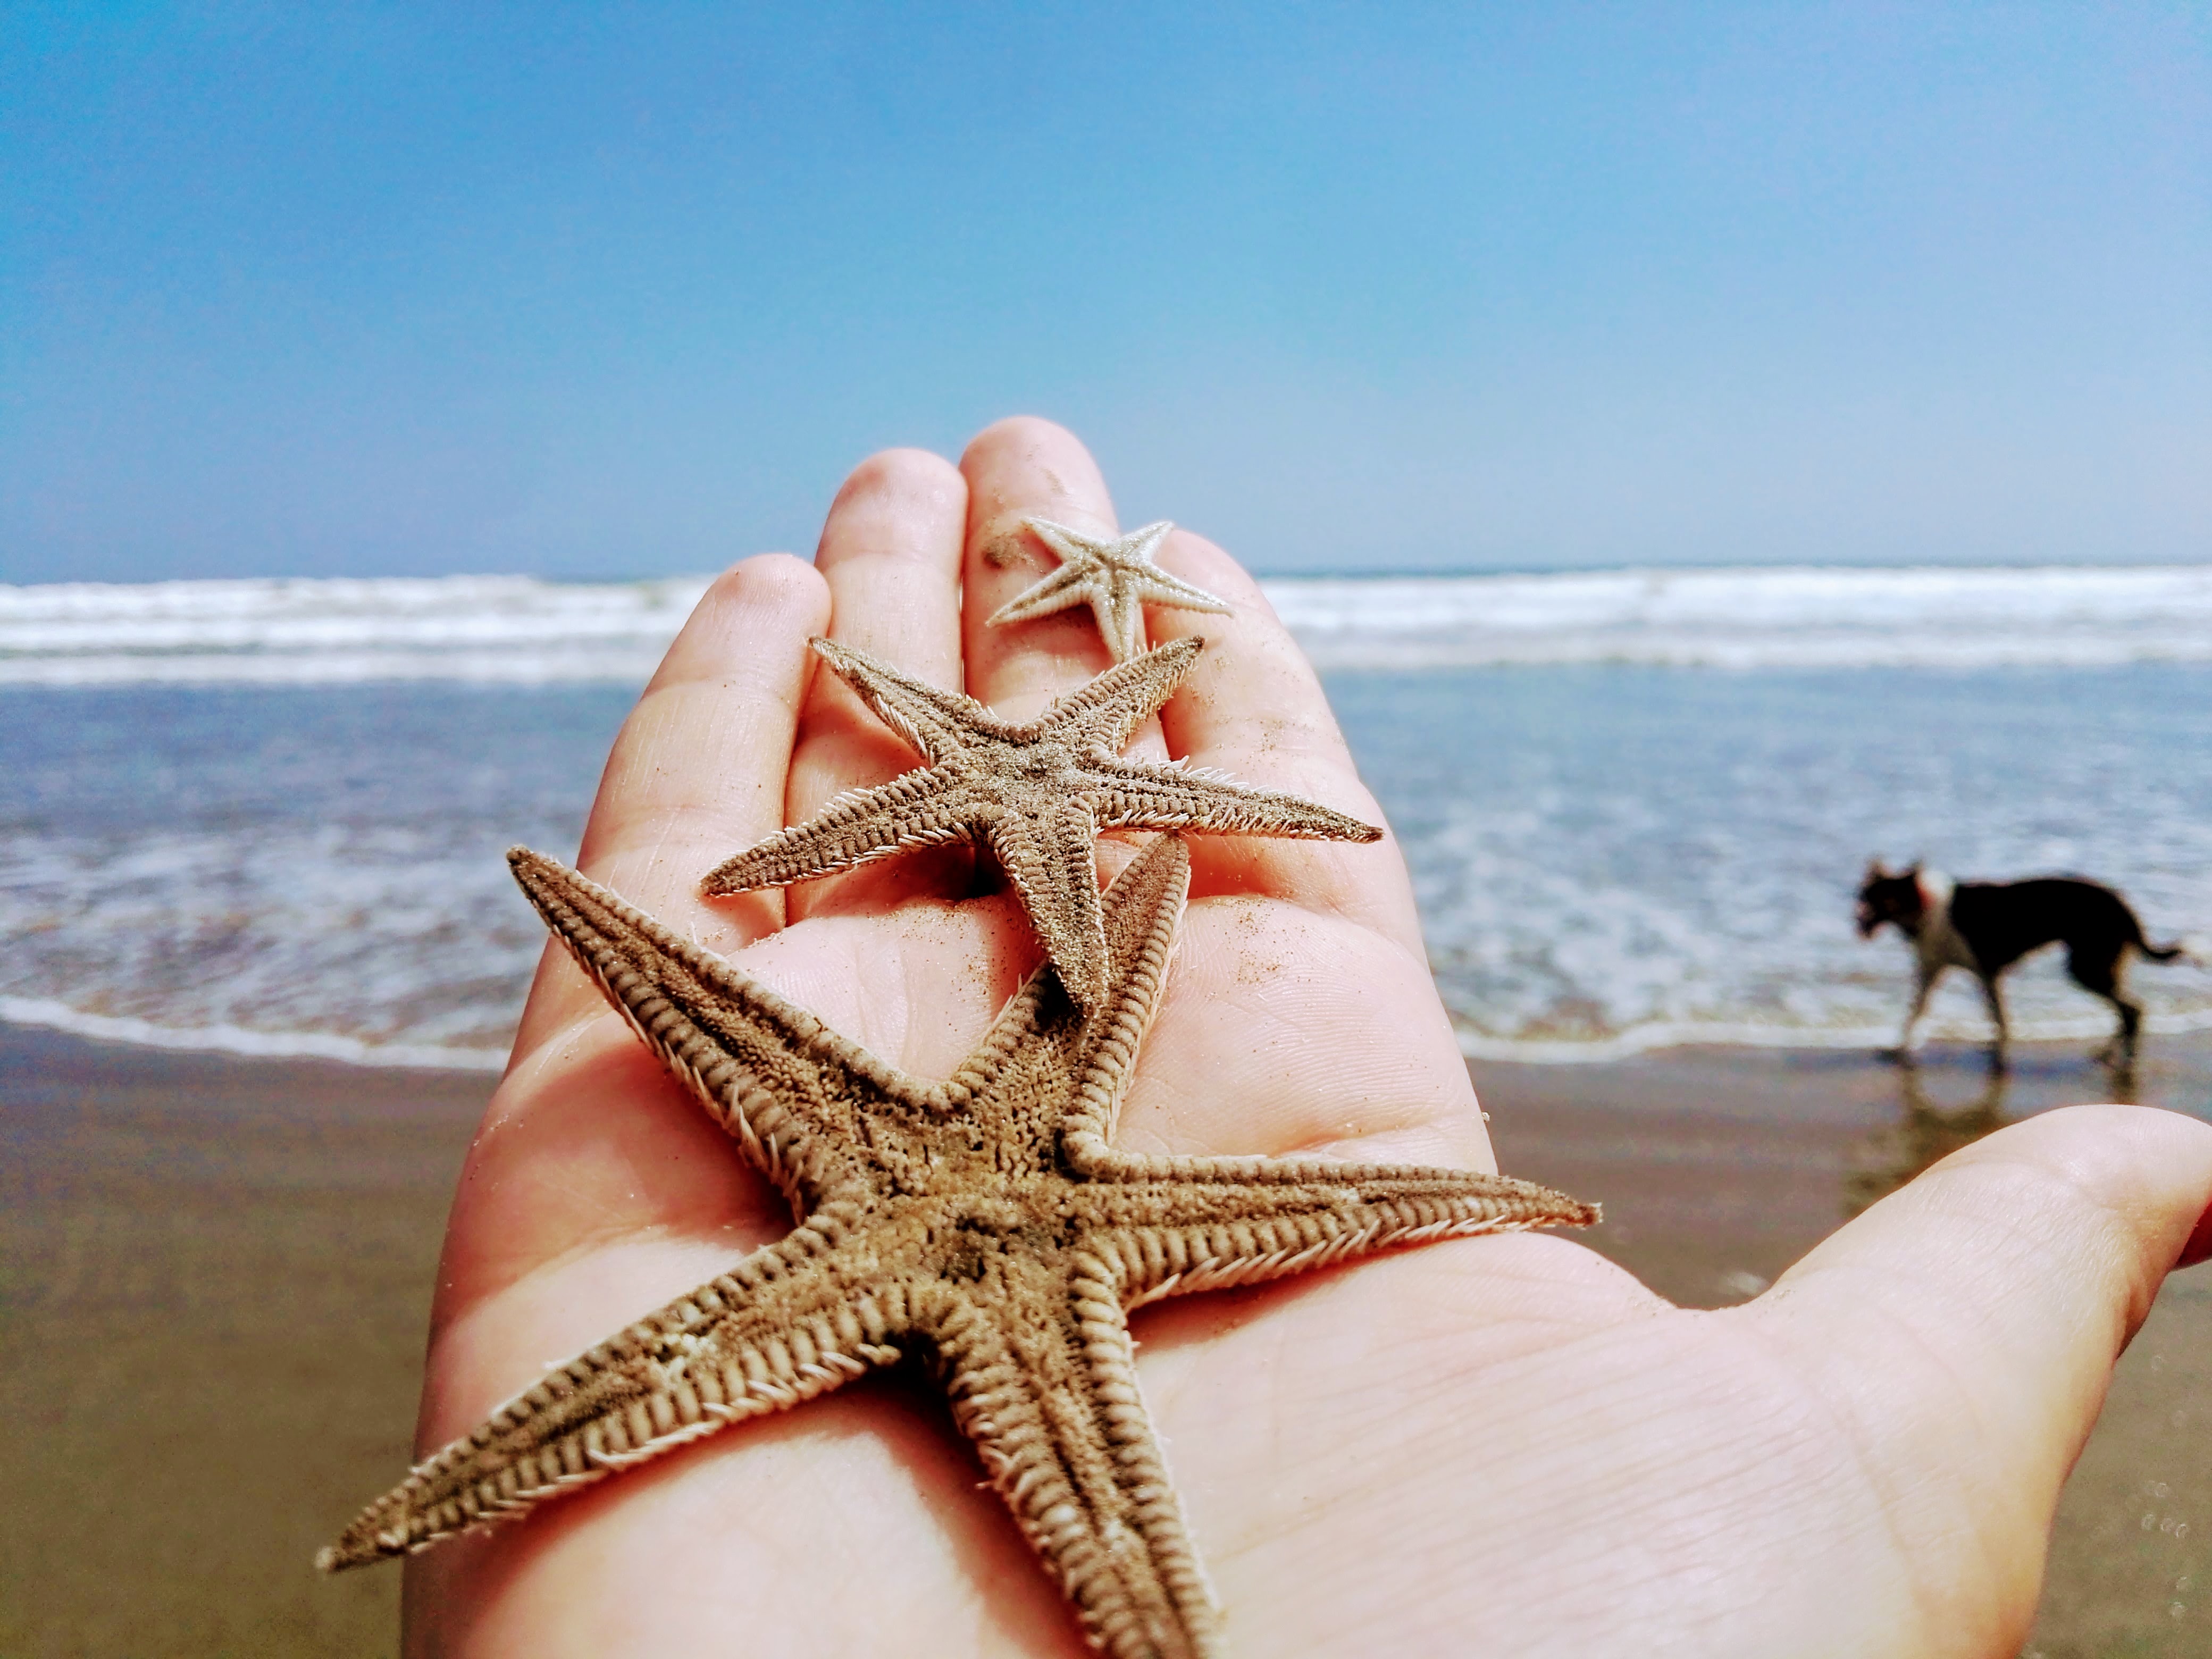 A starfish from the Pacific - Author: Stef Zisovska